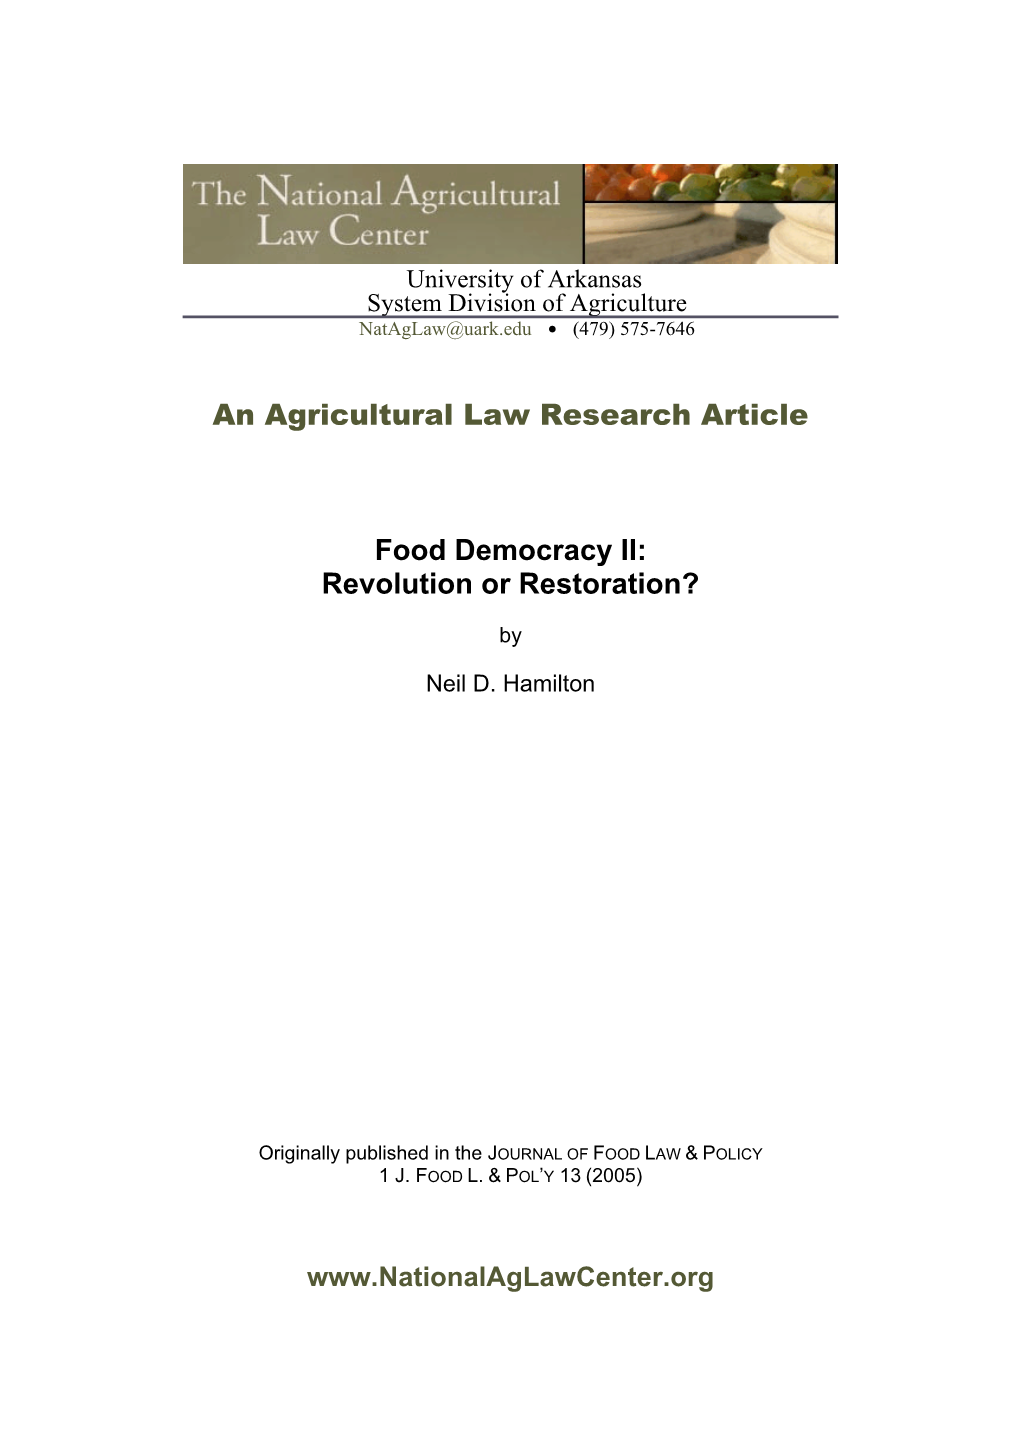 An Agricultural Law Research Article Food Democracy II